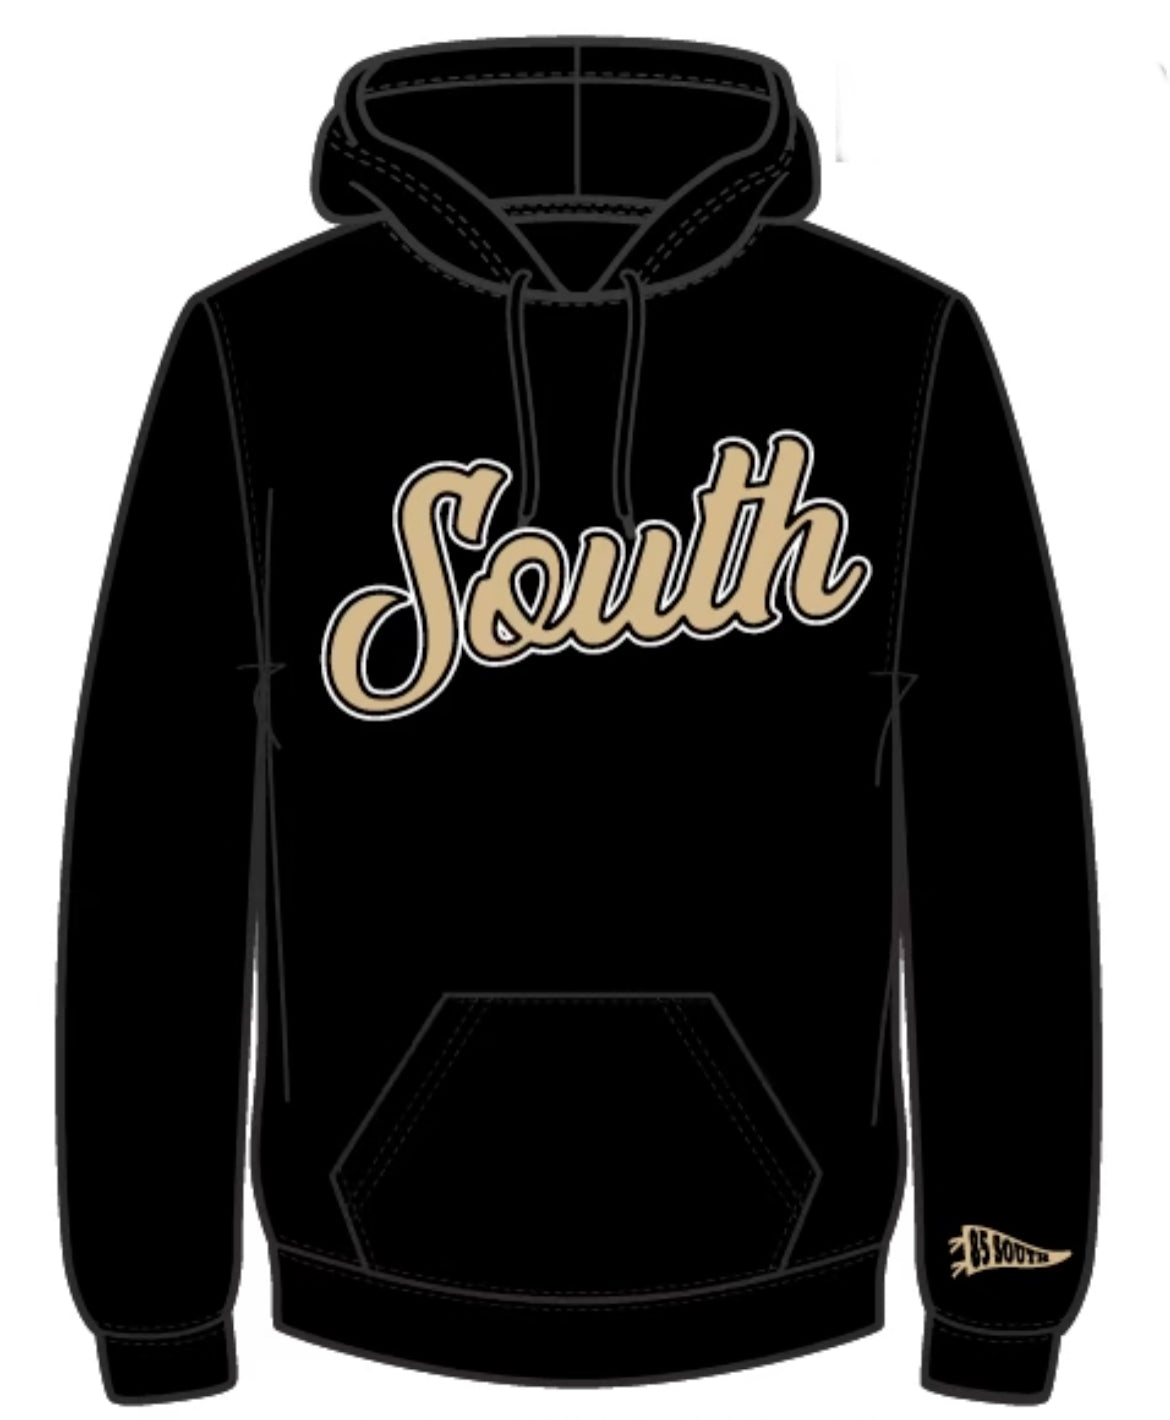 City Edition South Script Hoodie-New Orleans